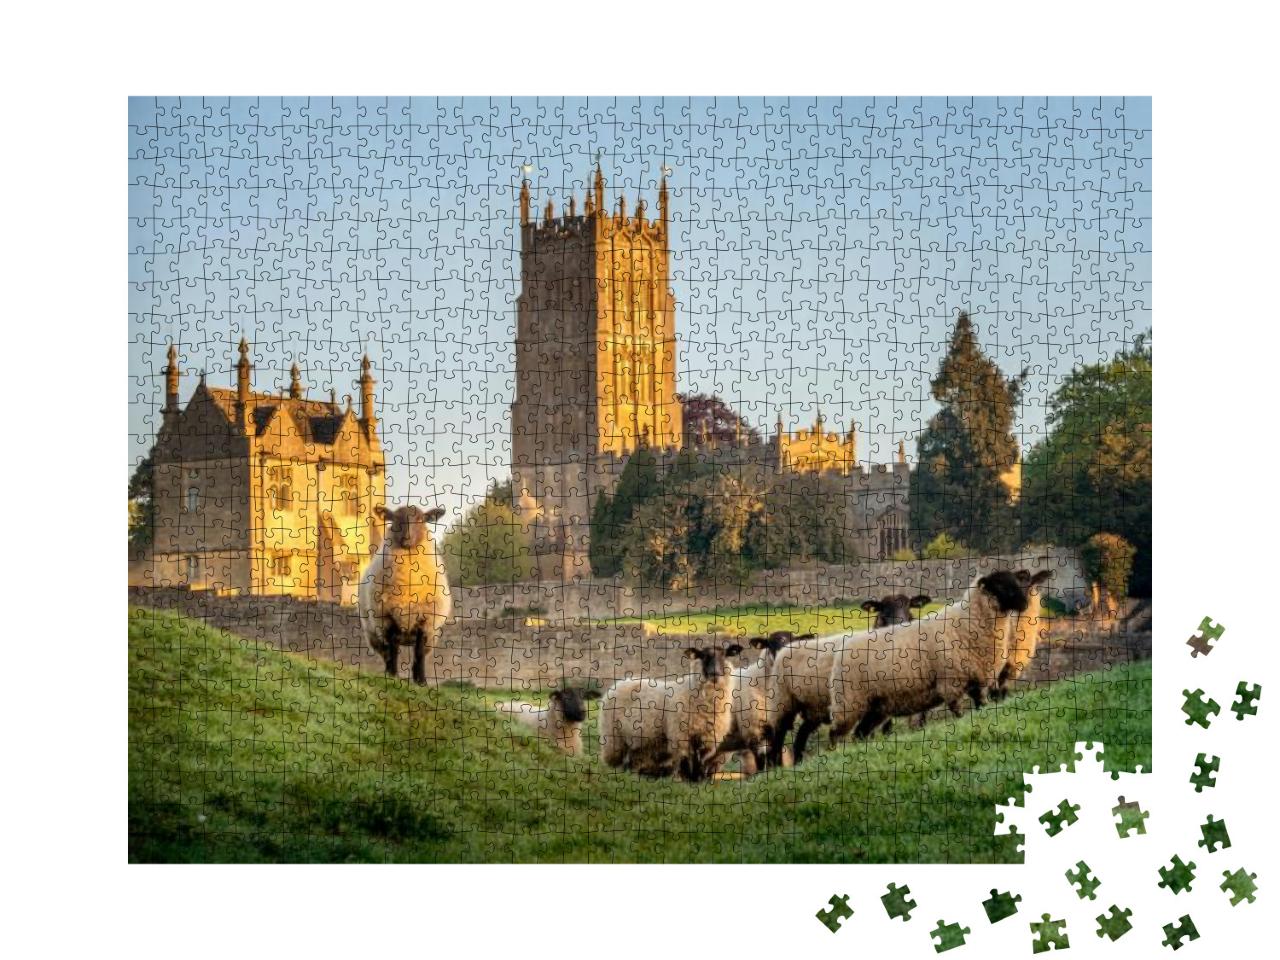 Cotswold Sheep Near Chipping Campden in Gloucestershire w... Jigsaw Puzzle with 1000 pieces